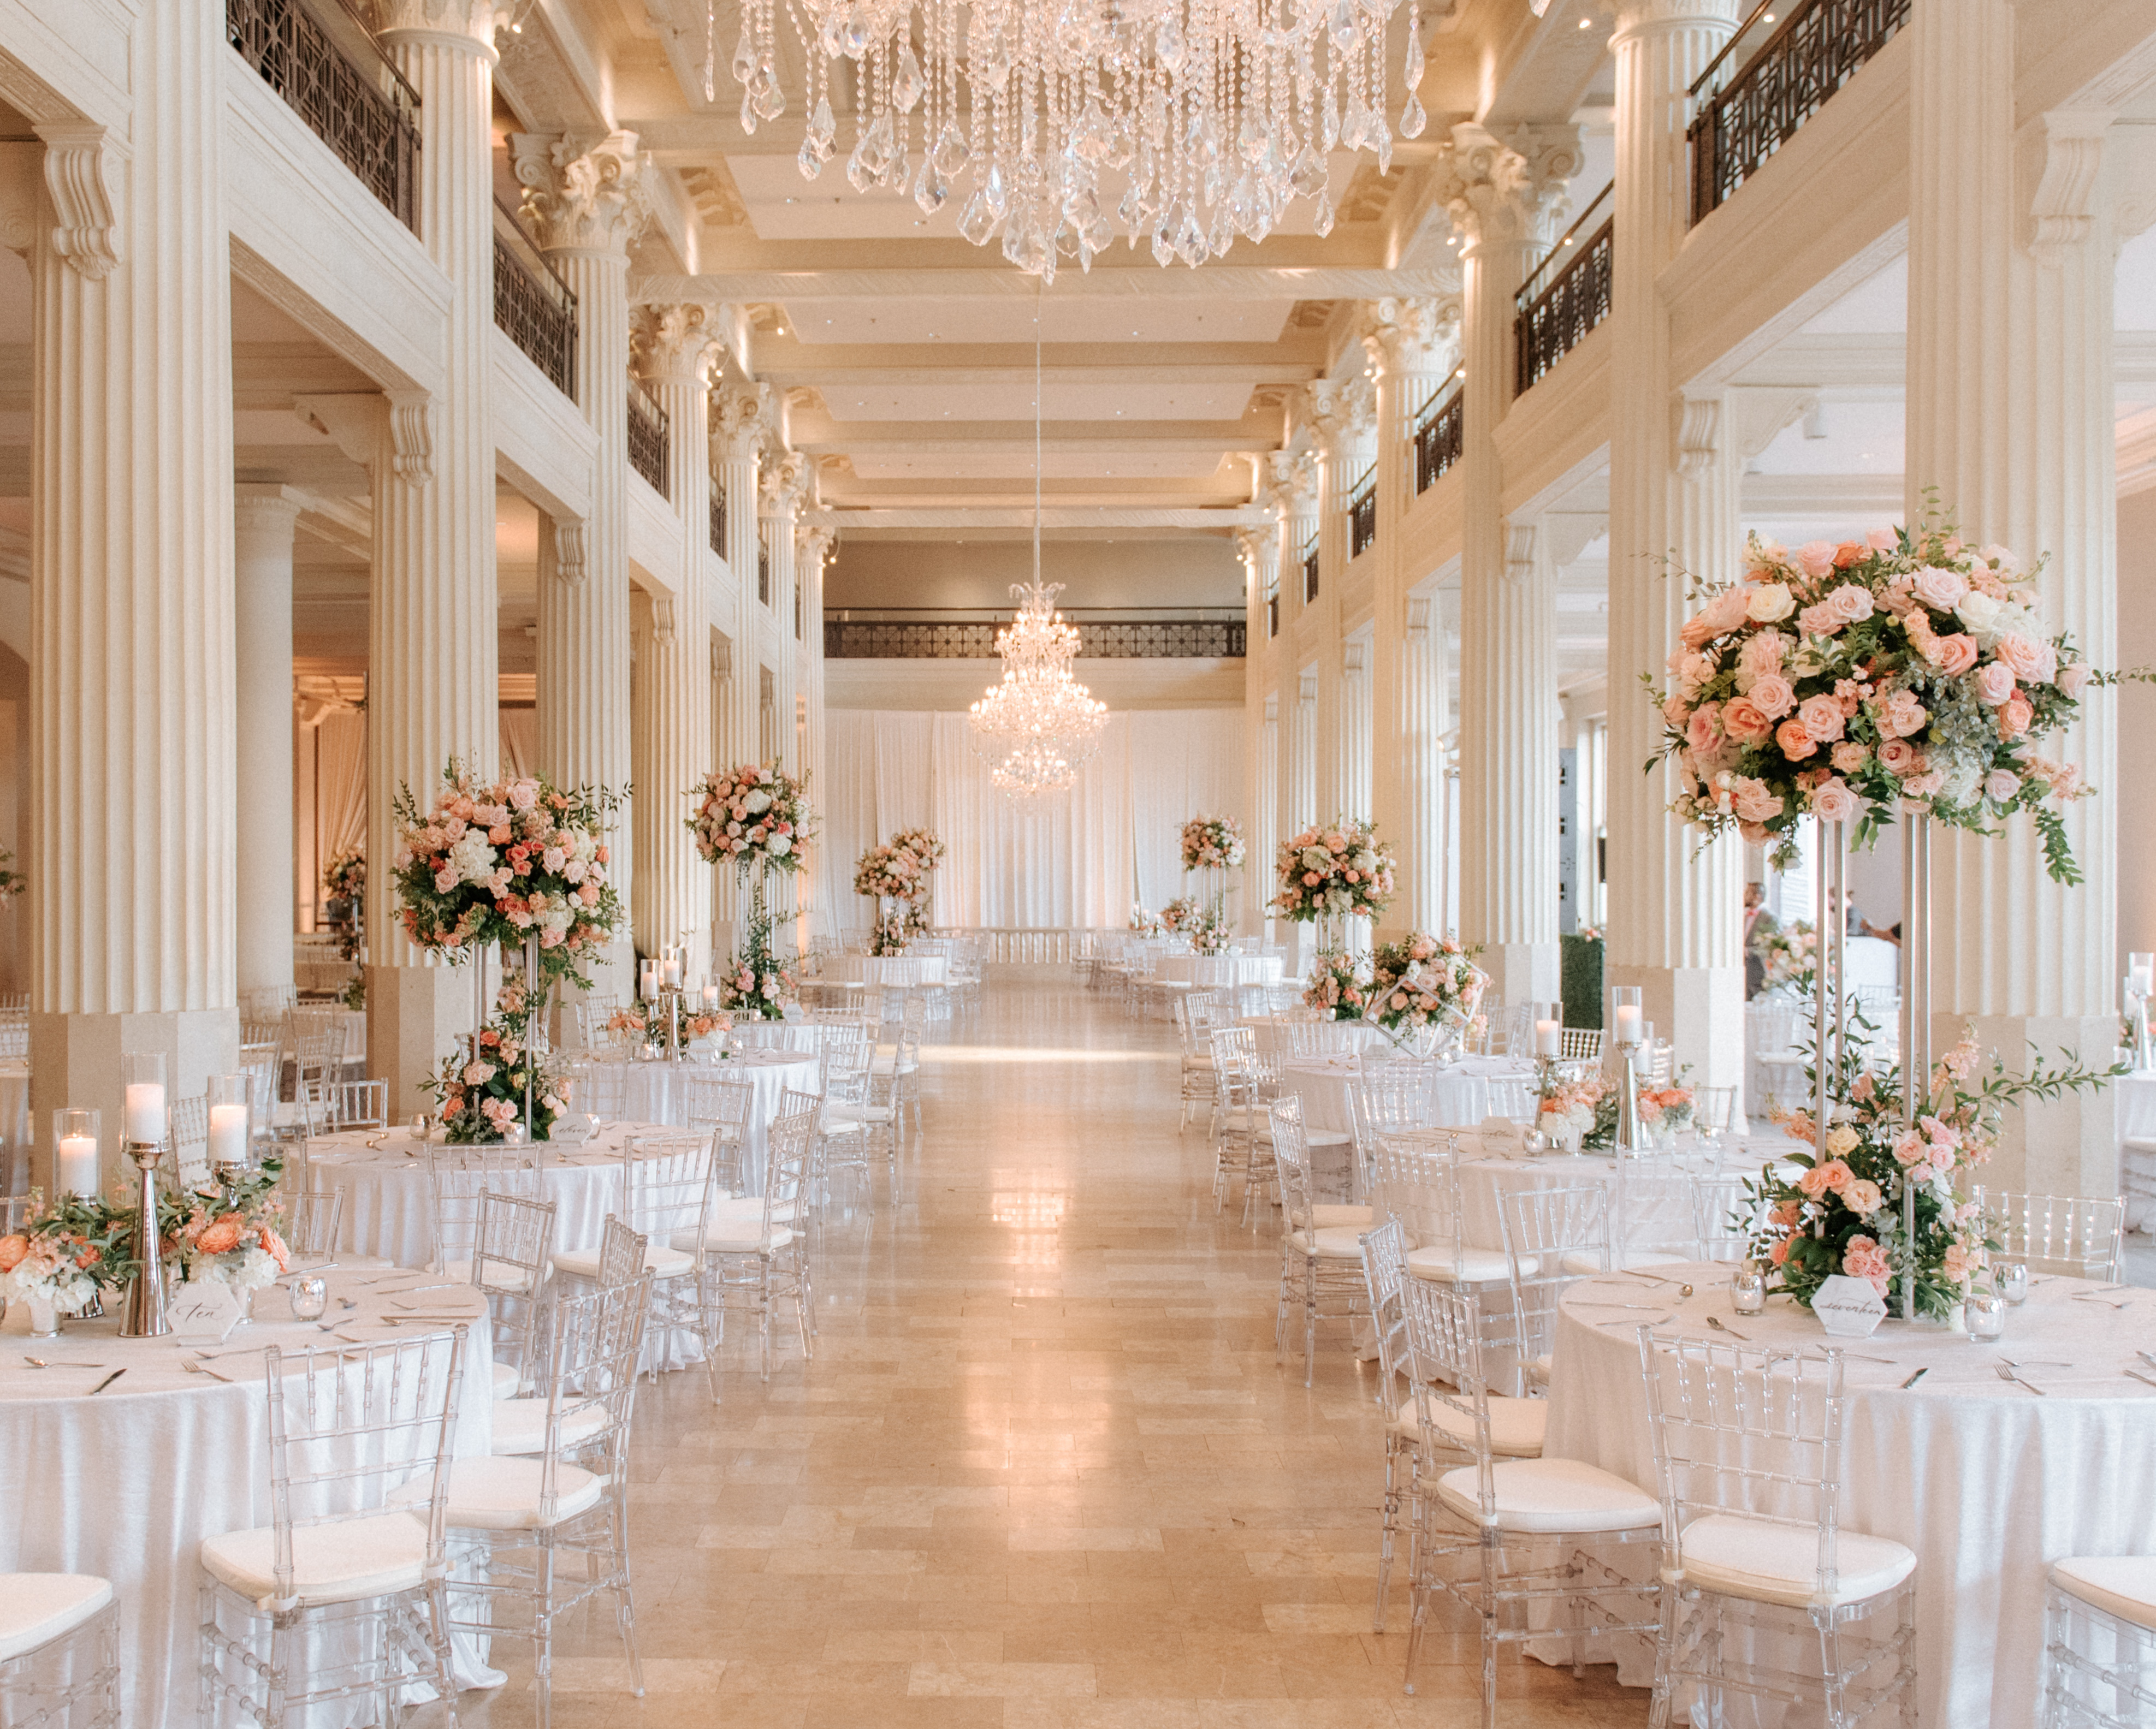 The reception tables are decorated with white, peach and pink floral centerpieces. 